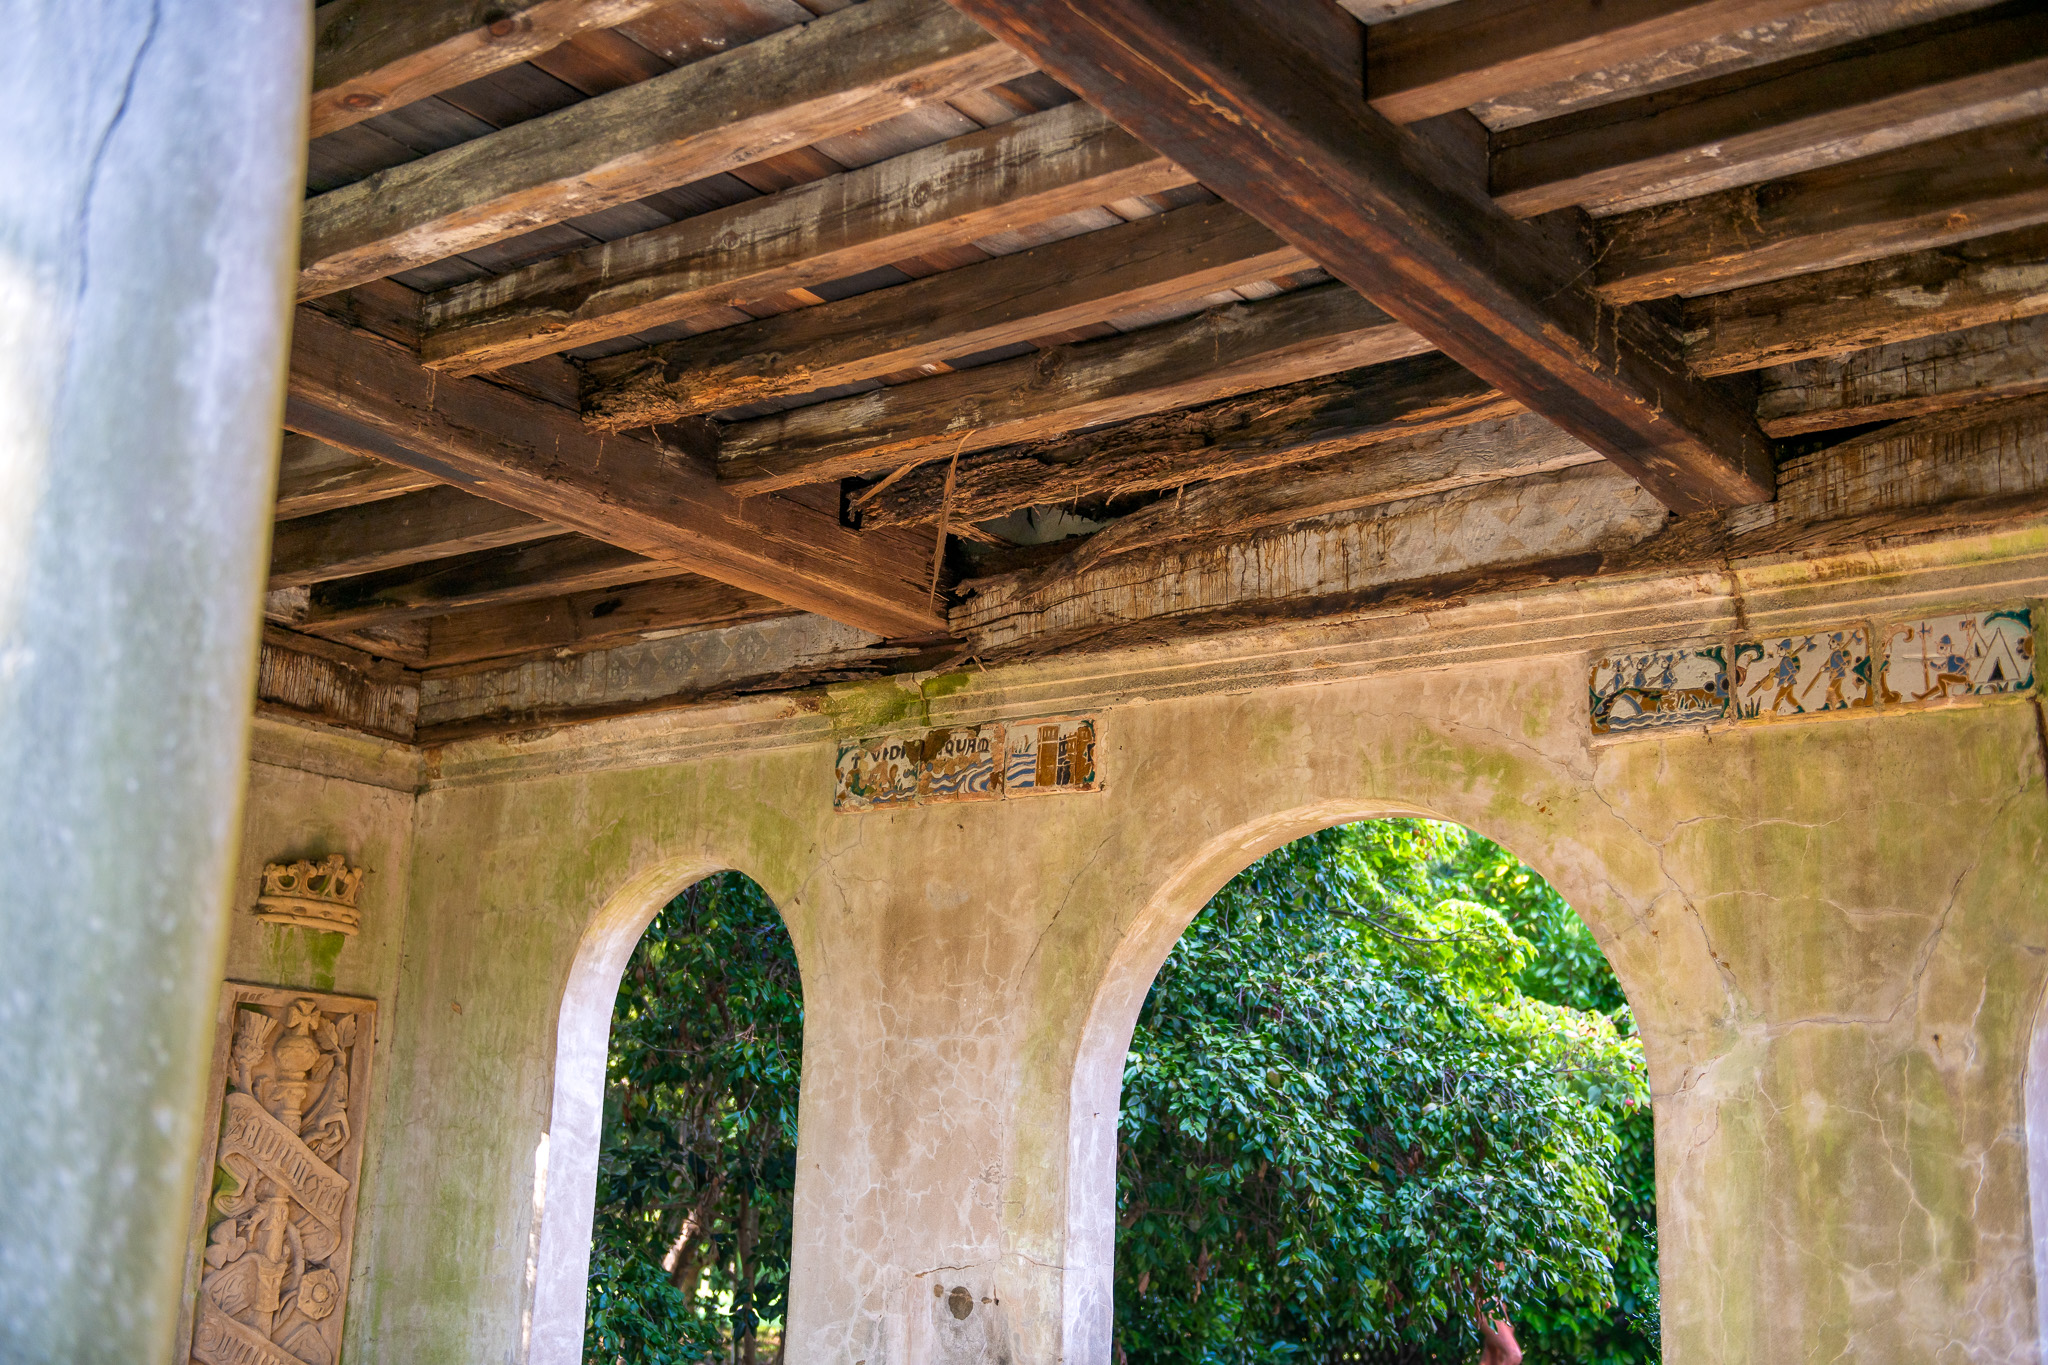 Ceiling of the Loggia at Virginia house showing rotting wood beams and missing tiles